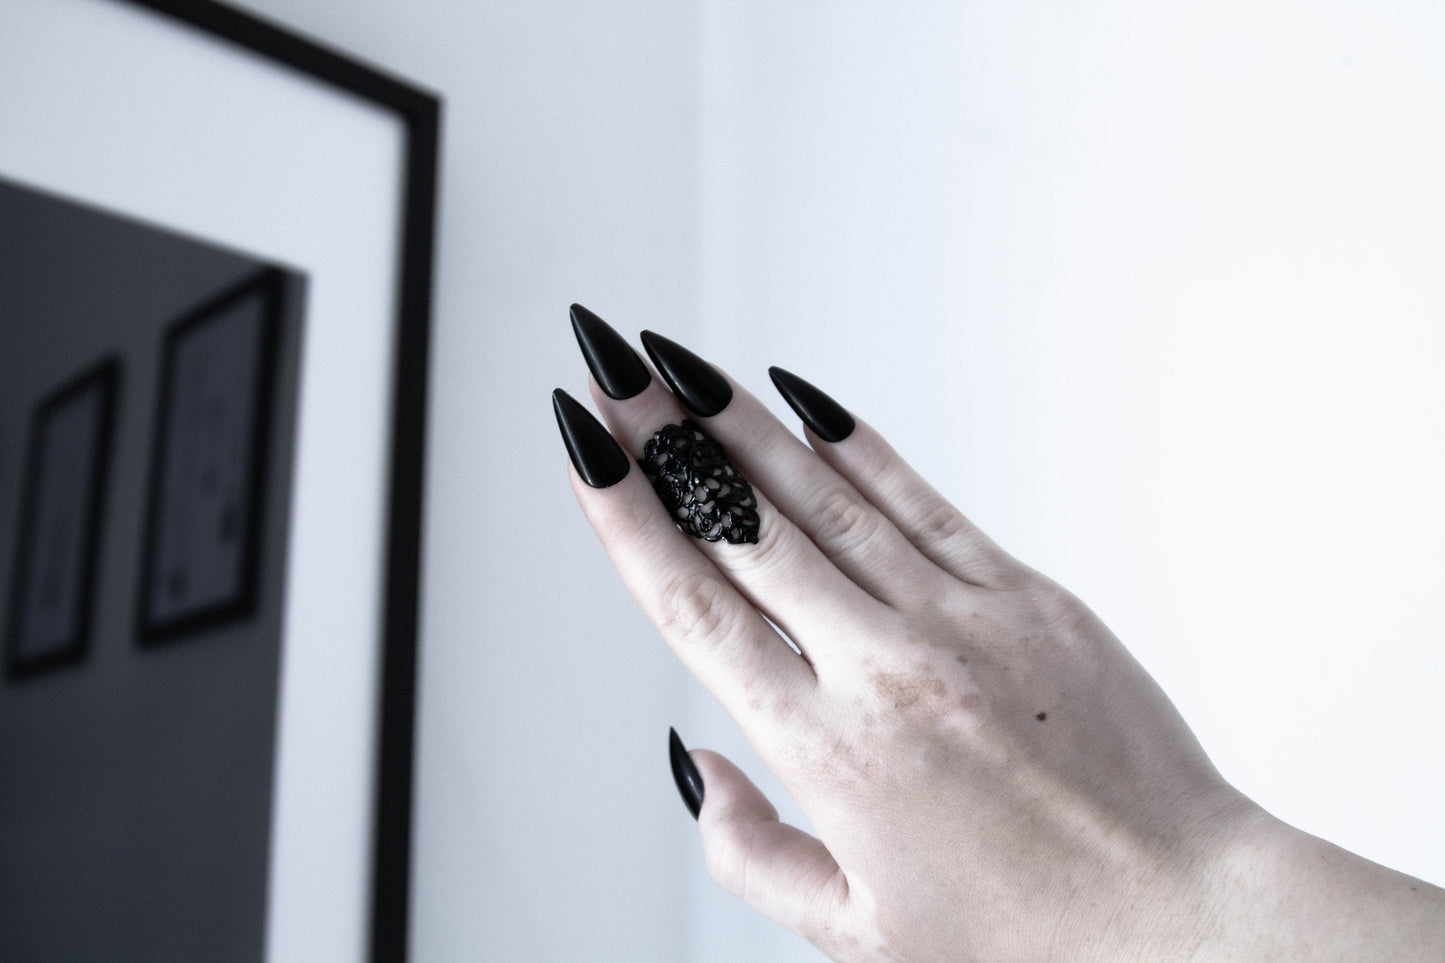 A hand presents a Myril Jewels neo-goth midi ring, embodying a dark-avantgarde style ideal for gothic and alternative fashion enthusiasts. The ring's elaborate texture and intricate design speak to the brand's signature gothic-chic aesthetic, making it a perfect accessory for everyday wear or as a statement piece for Halloween. Its bold, whimsigoth charm is complemented by the wearer's long, sleek black nails, enhancing its witchcore appeal, suitable for rave parties, festivals